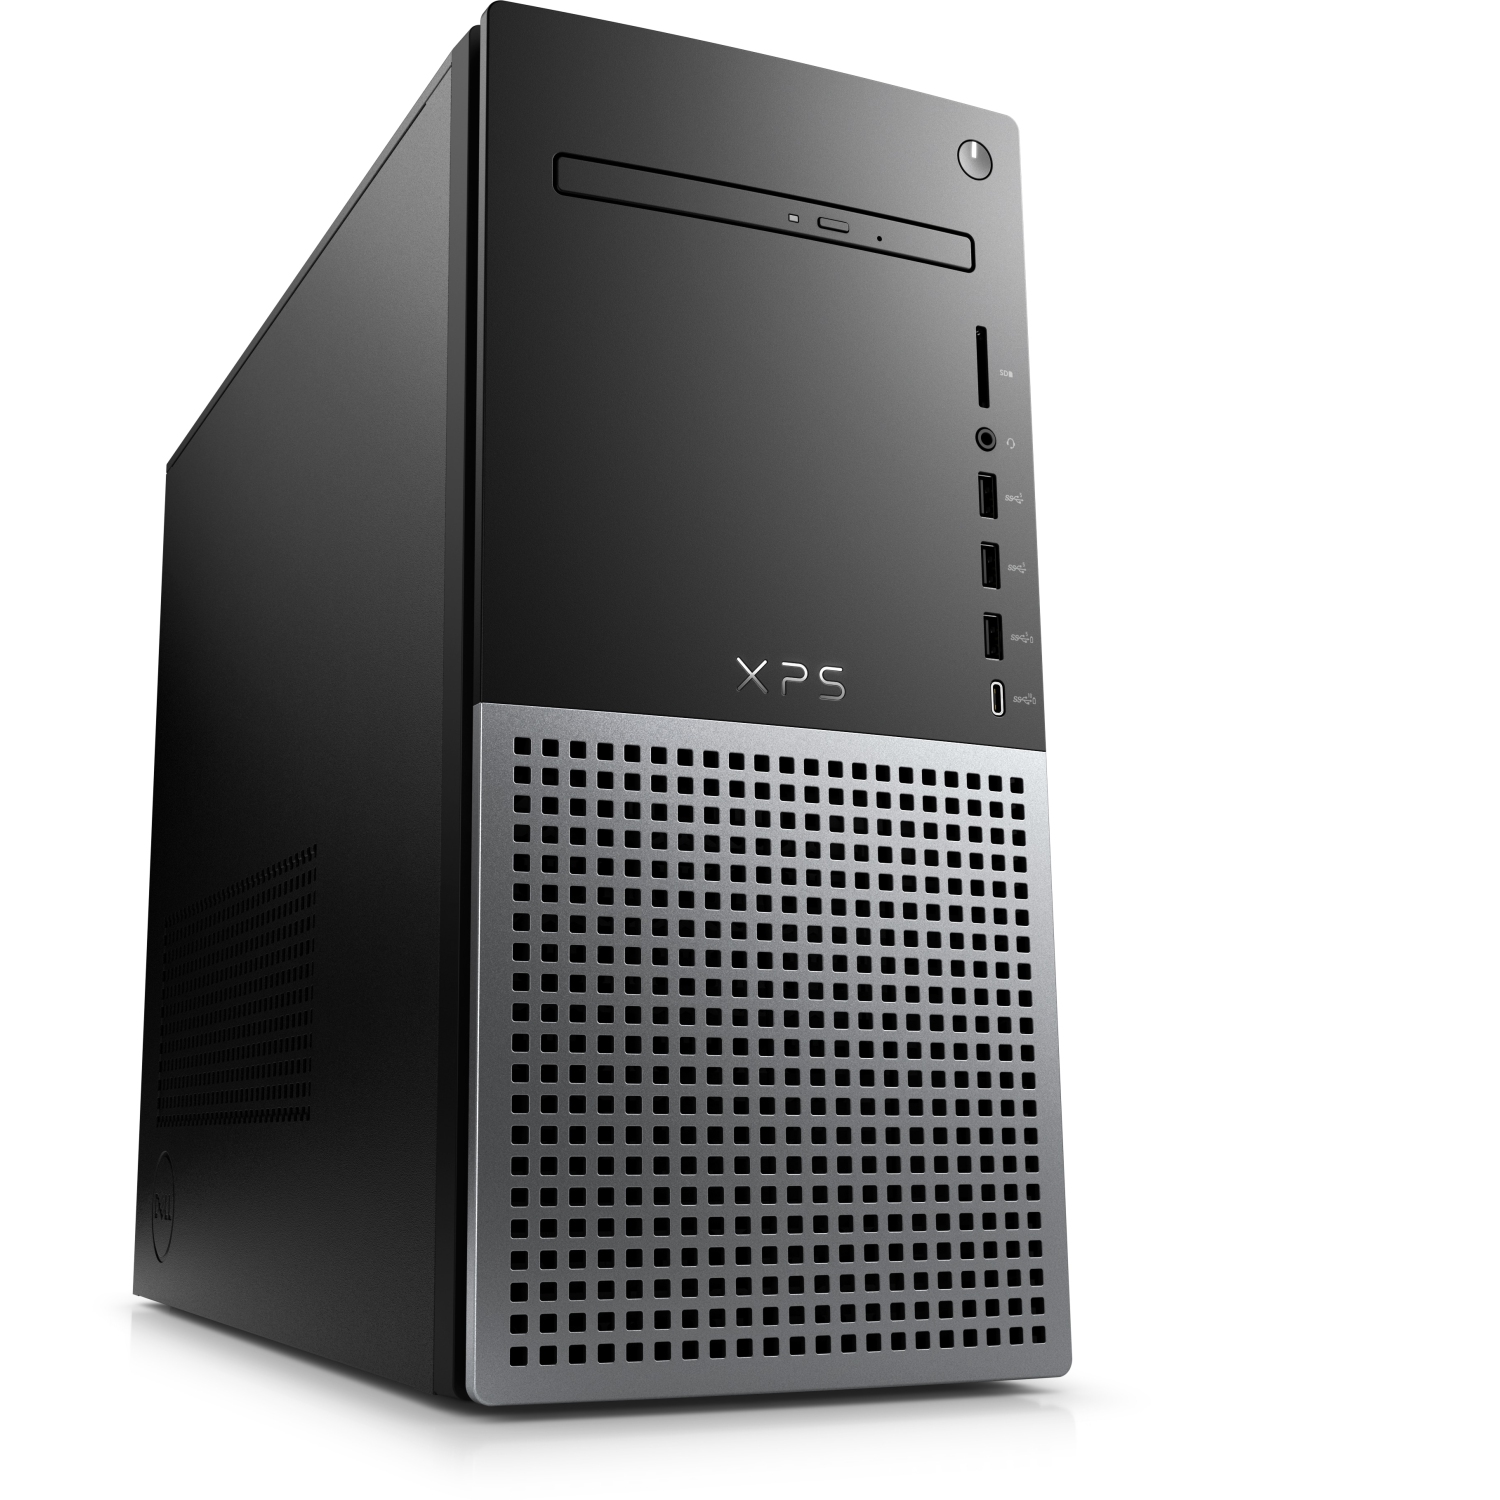 Refurbished (Excellent) - Dell XPS 8950 Desktop (2022) | Core i5 - 256GB SSD - 8GB RAM | 6 Cores @ 4.4 GHz - 12th Gen CPU Certified Refurbished